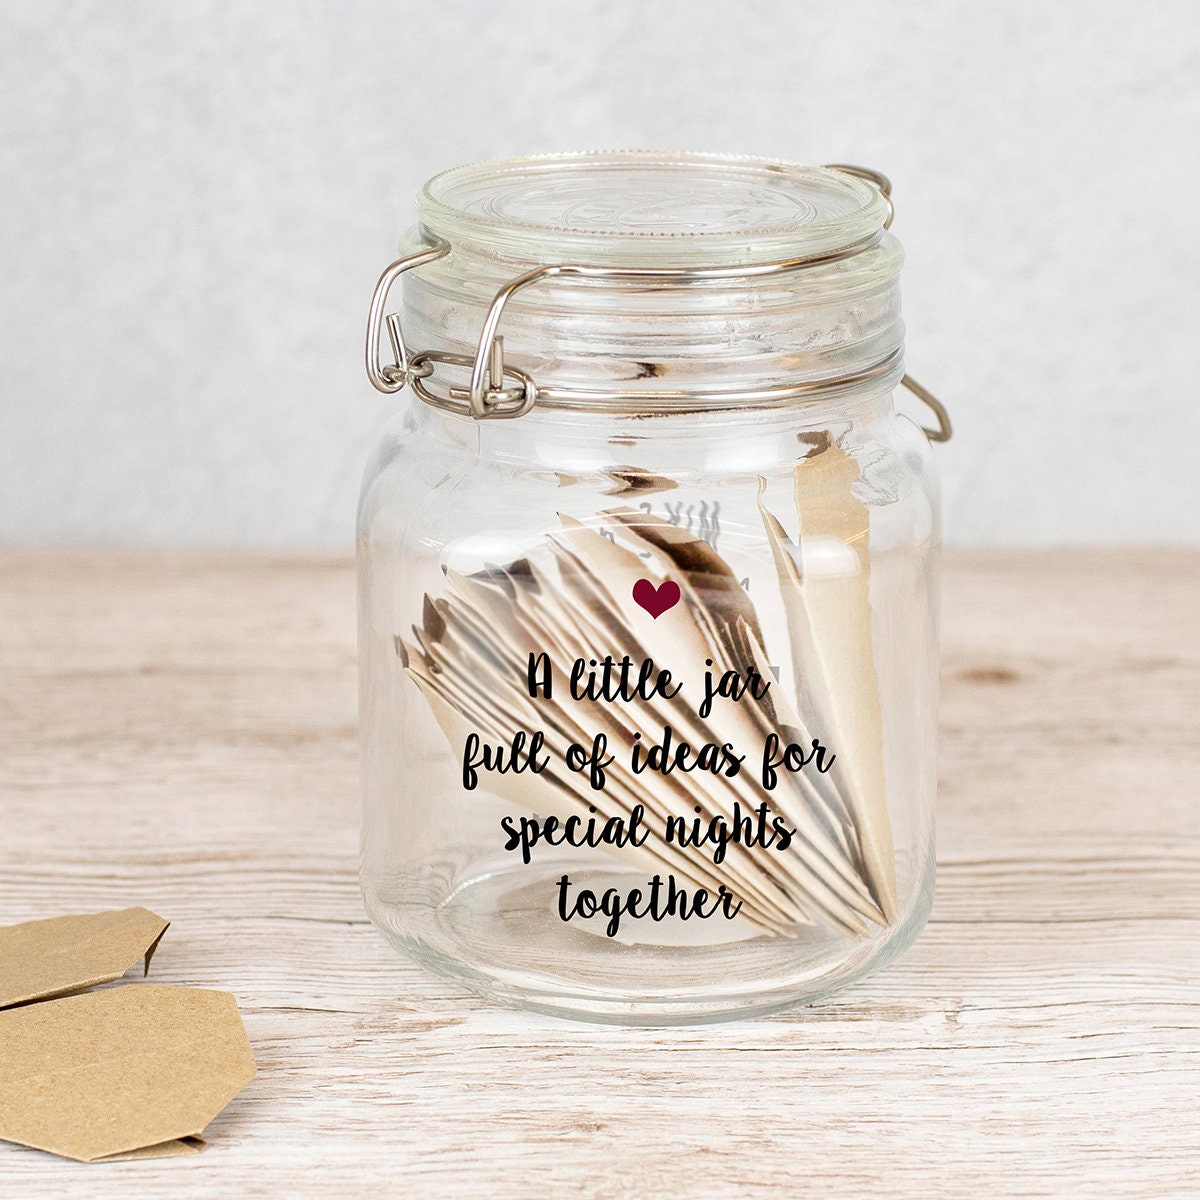 Date Night Ideas for the Happy Couple - Idea Jar Card - Wedding Advice  Cards - Gold Heart - 4x4 Square - Pack of 40